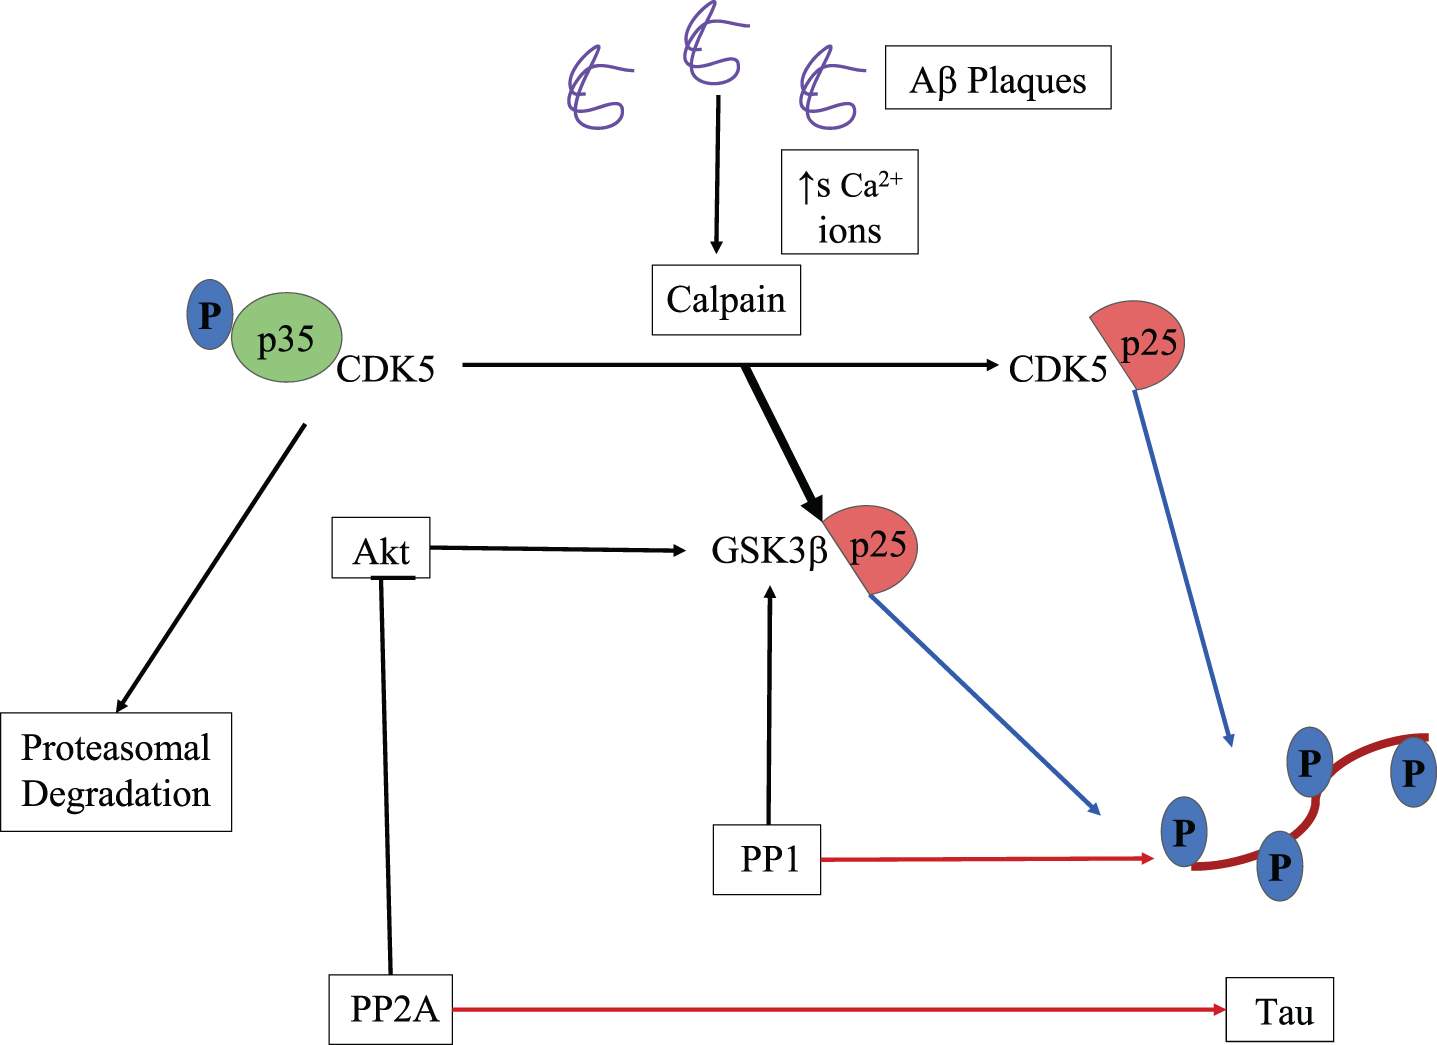 A schematic representation of both CDK5 and GSK3β induced phosphorylation of tau protein, activated by calpain cleaved p25. Protein phosphatases 1 and 2A which dephosphorylates tau protein also activate GSK3β leading to more phosphorylation than dephosphorylation. Thick black arrow indicates more affinity of p25 toward GSK3β than CDK5, blue and red arrows indicate phosphorylation and dephosphorylation activity respectively [33].